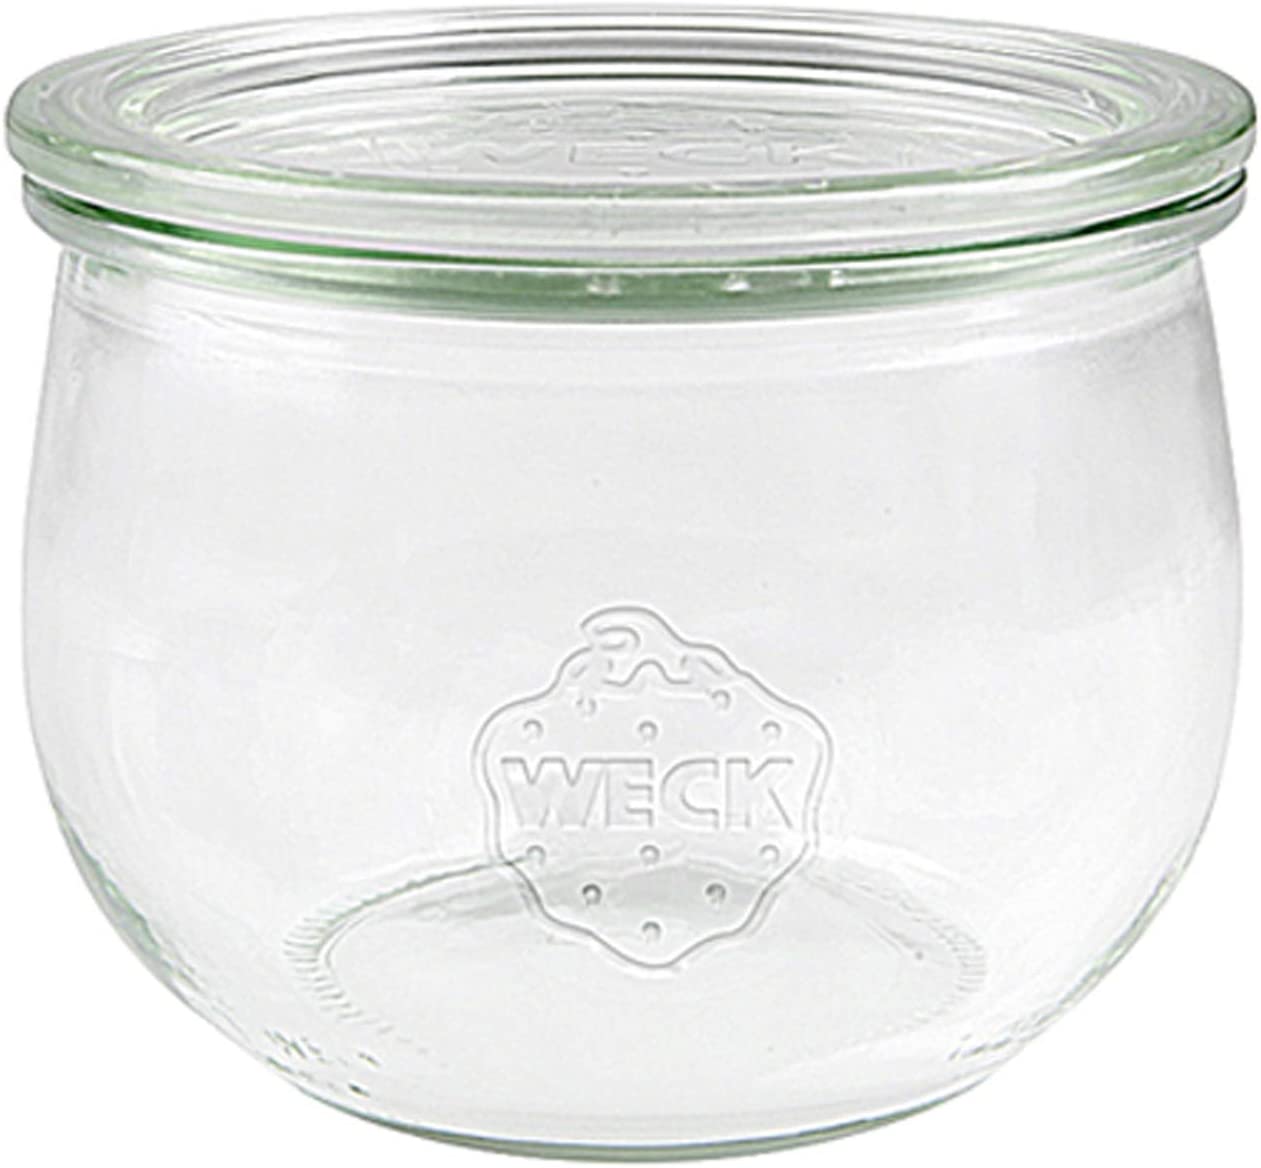 Weck 500ml Preserving Glass # 744 (Pack of 1)